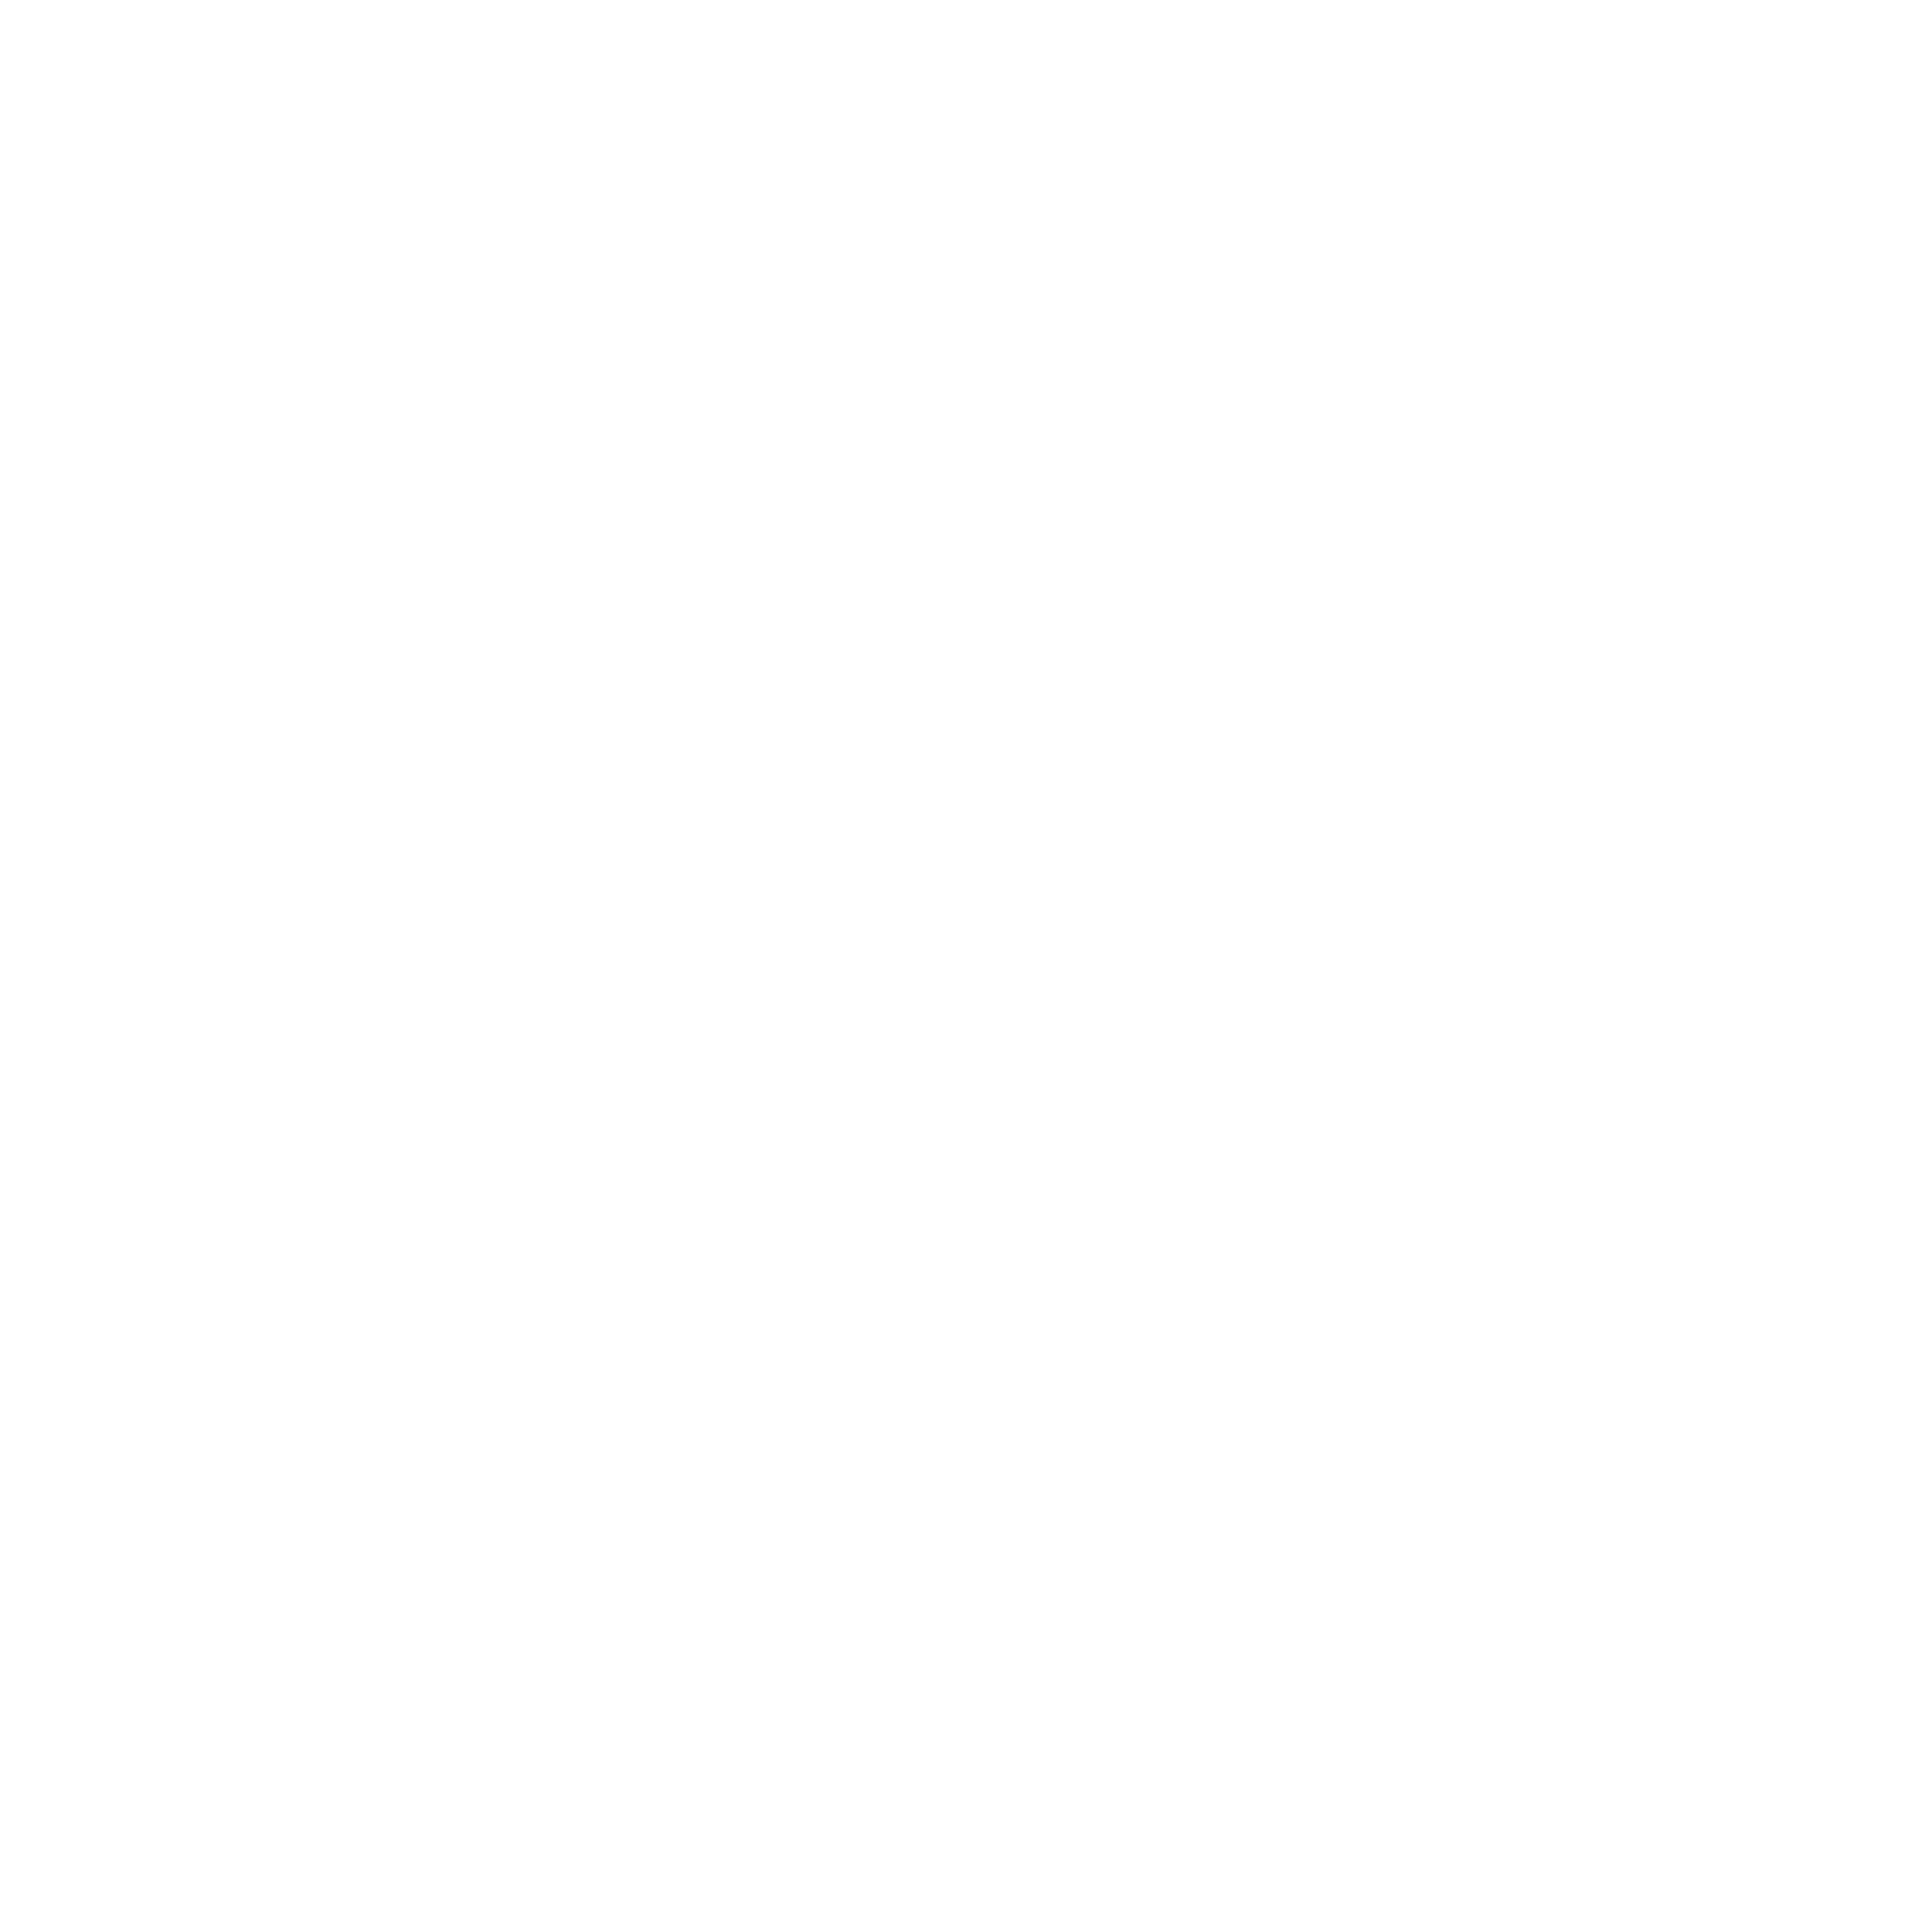 Dead Weight Brewing Co.